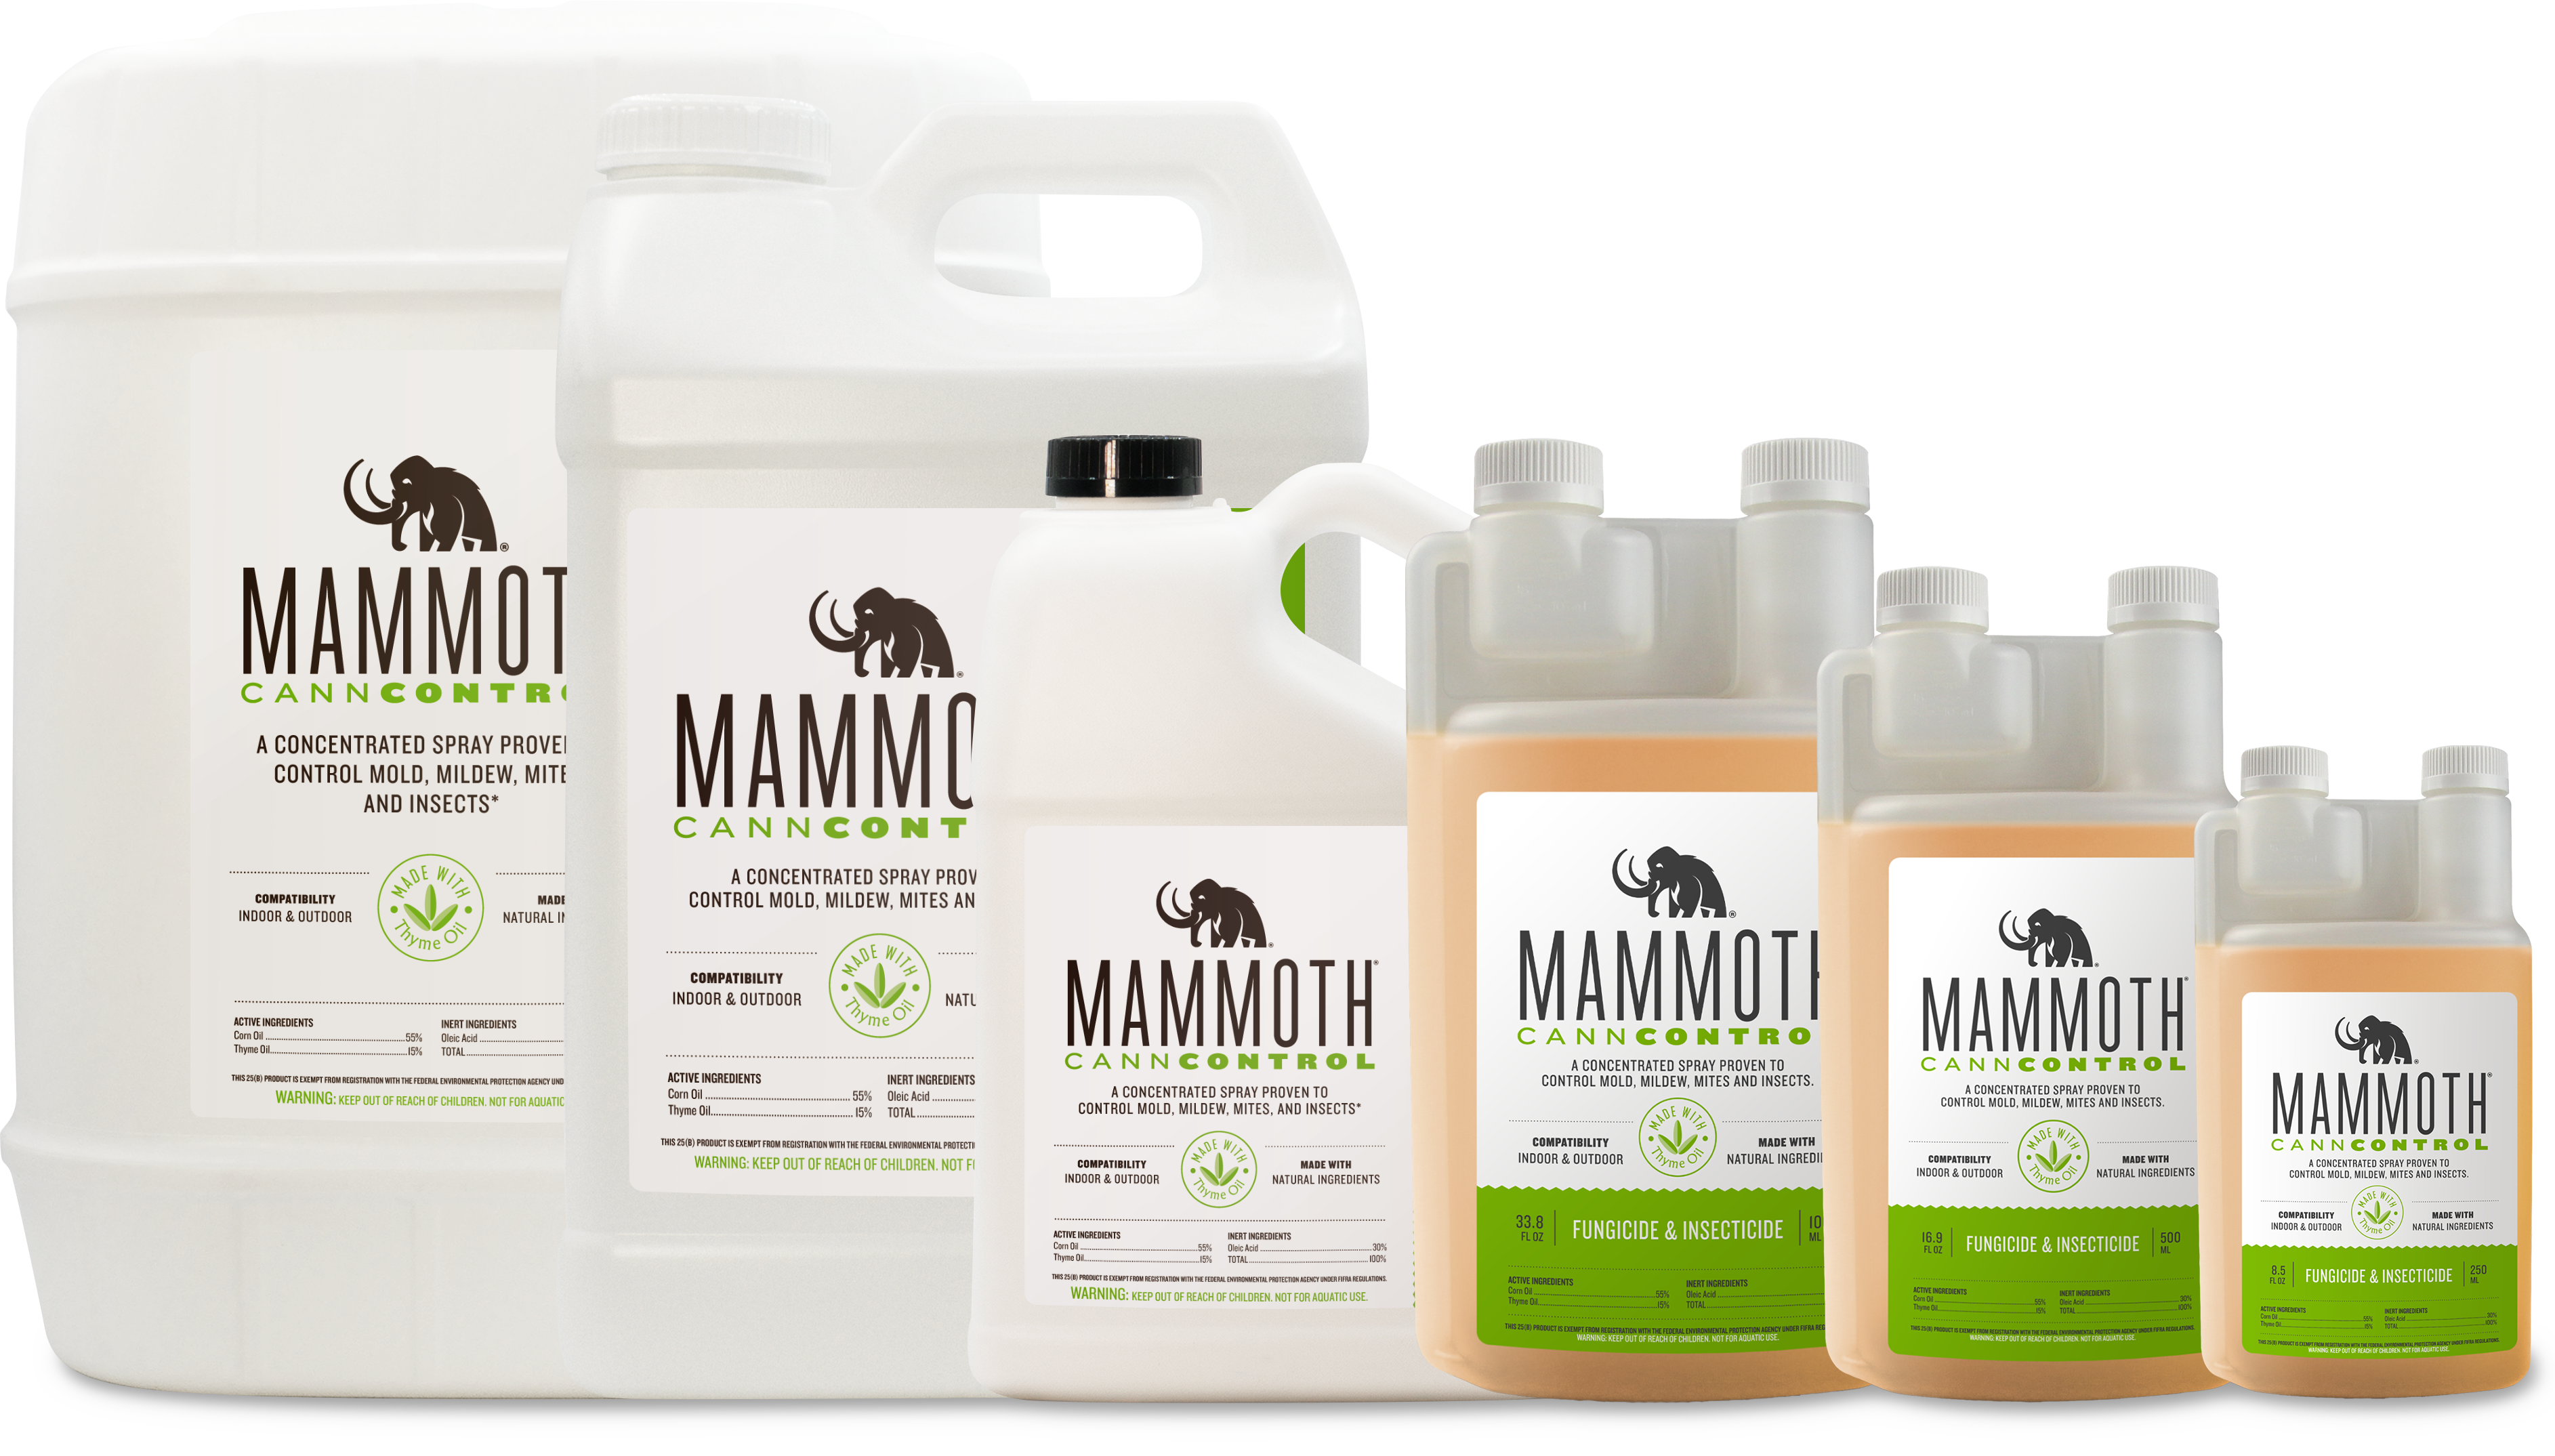 Image of all available sizes of Mammoth CannControl, from 250mL to 5 Gallons